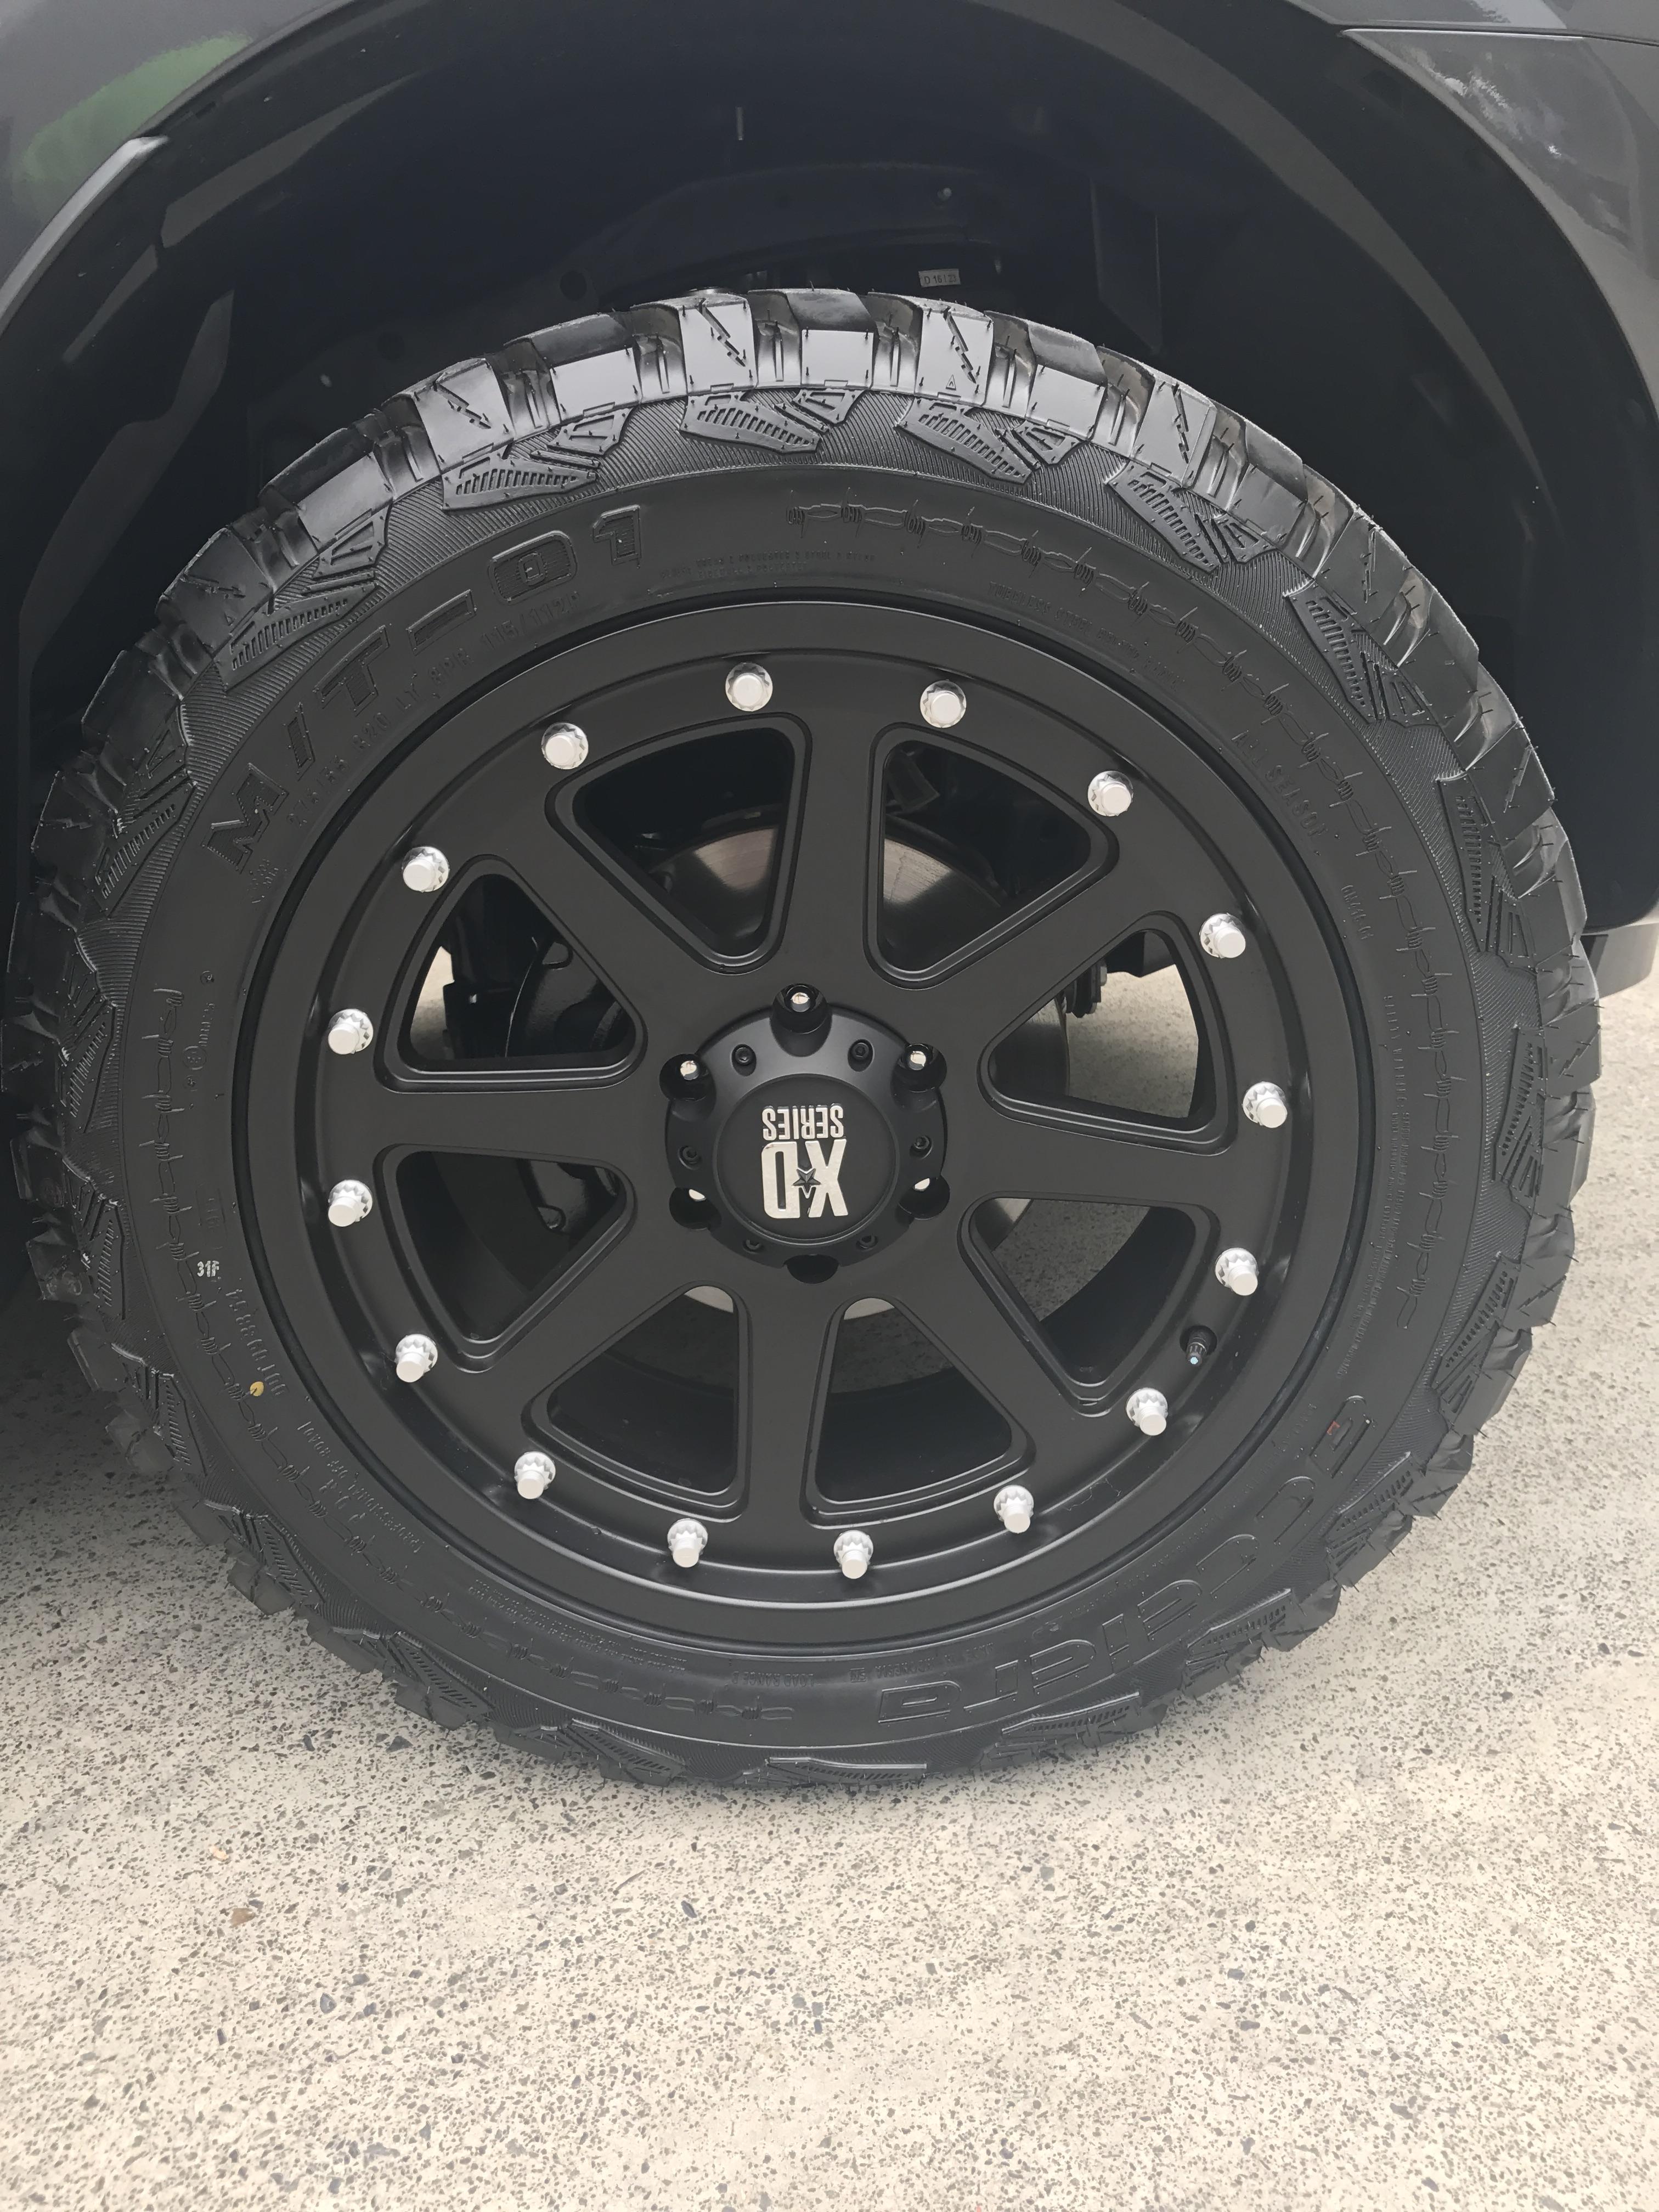 SUV and RV wheel protection